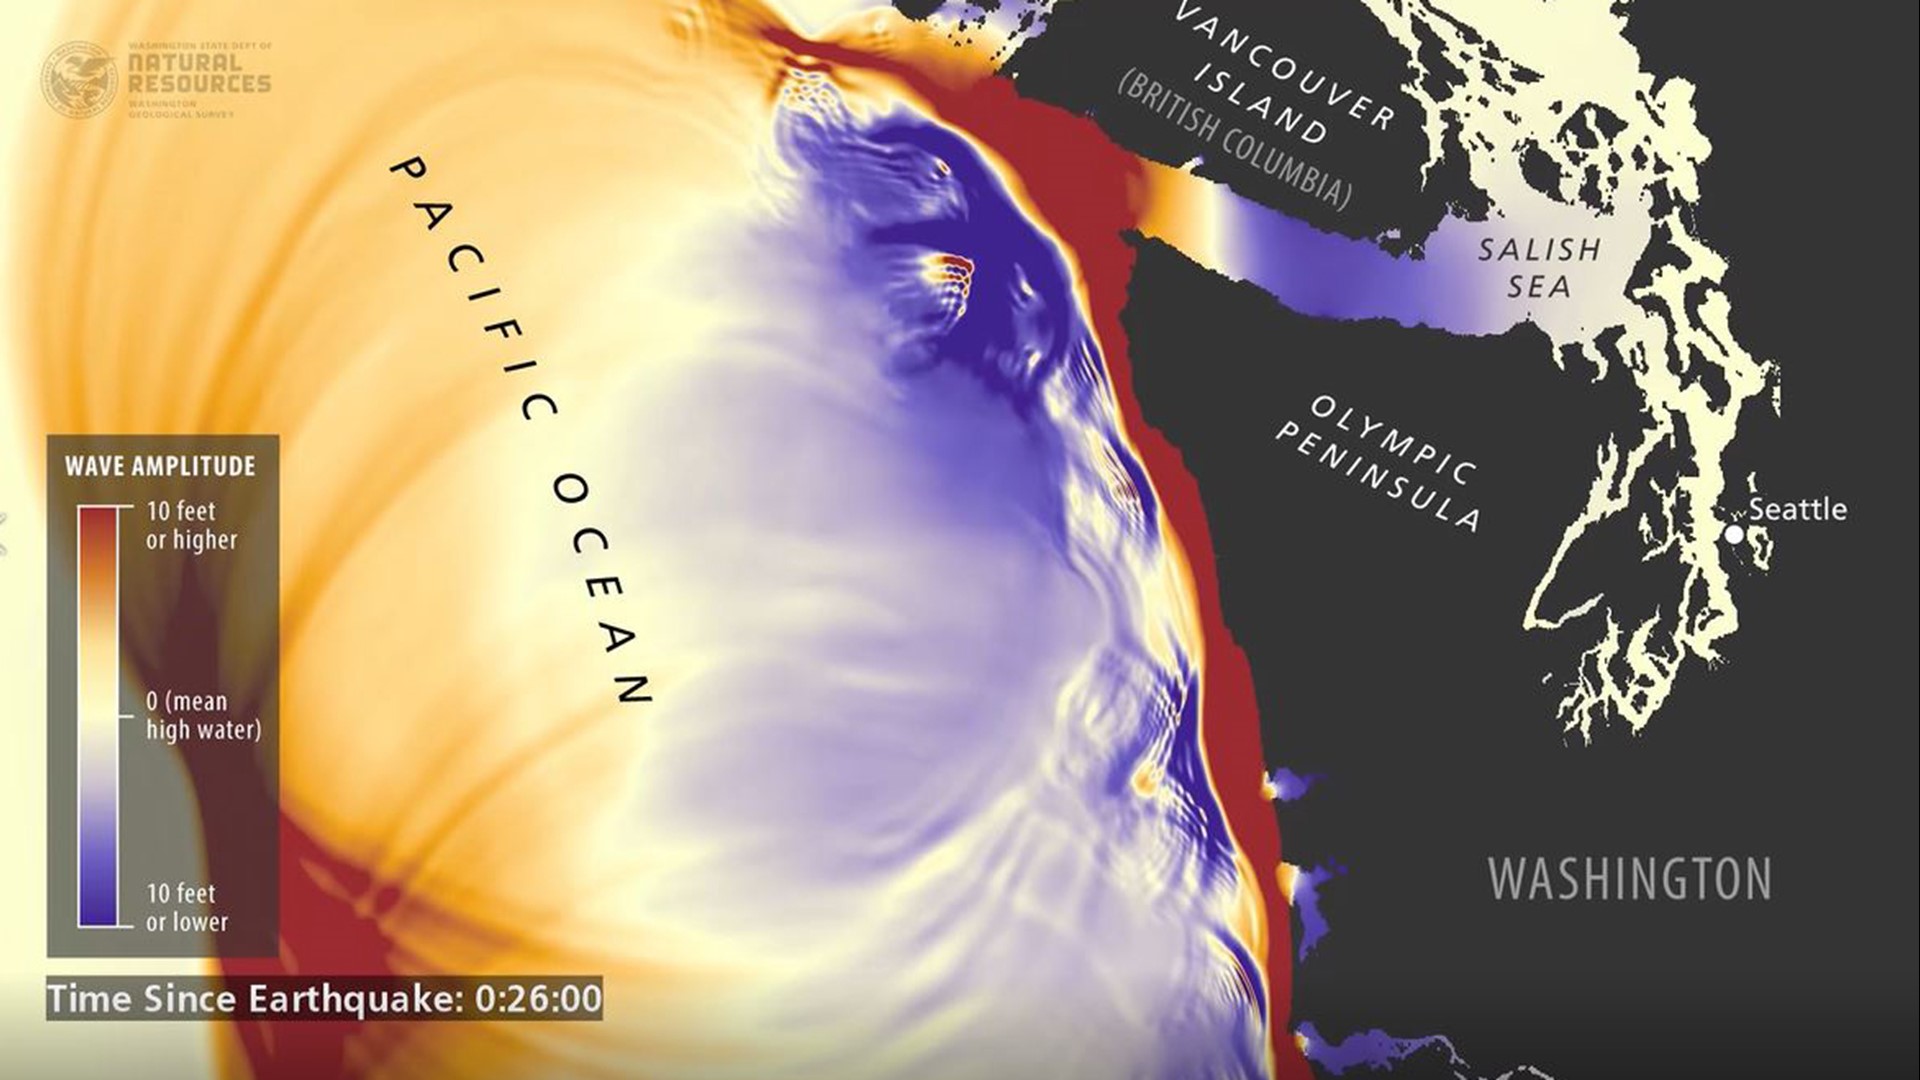 A simulation for Washington state shows the path of a tsunami from a hypothetical magnitude 9.0 earthquake scenario on the Cascadia subduction zone.